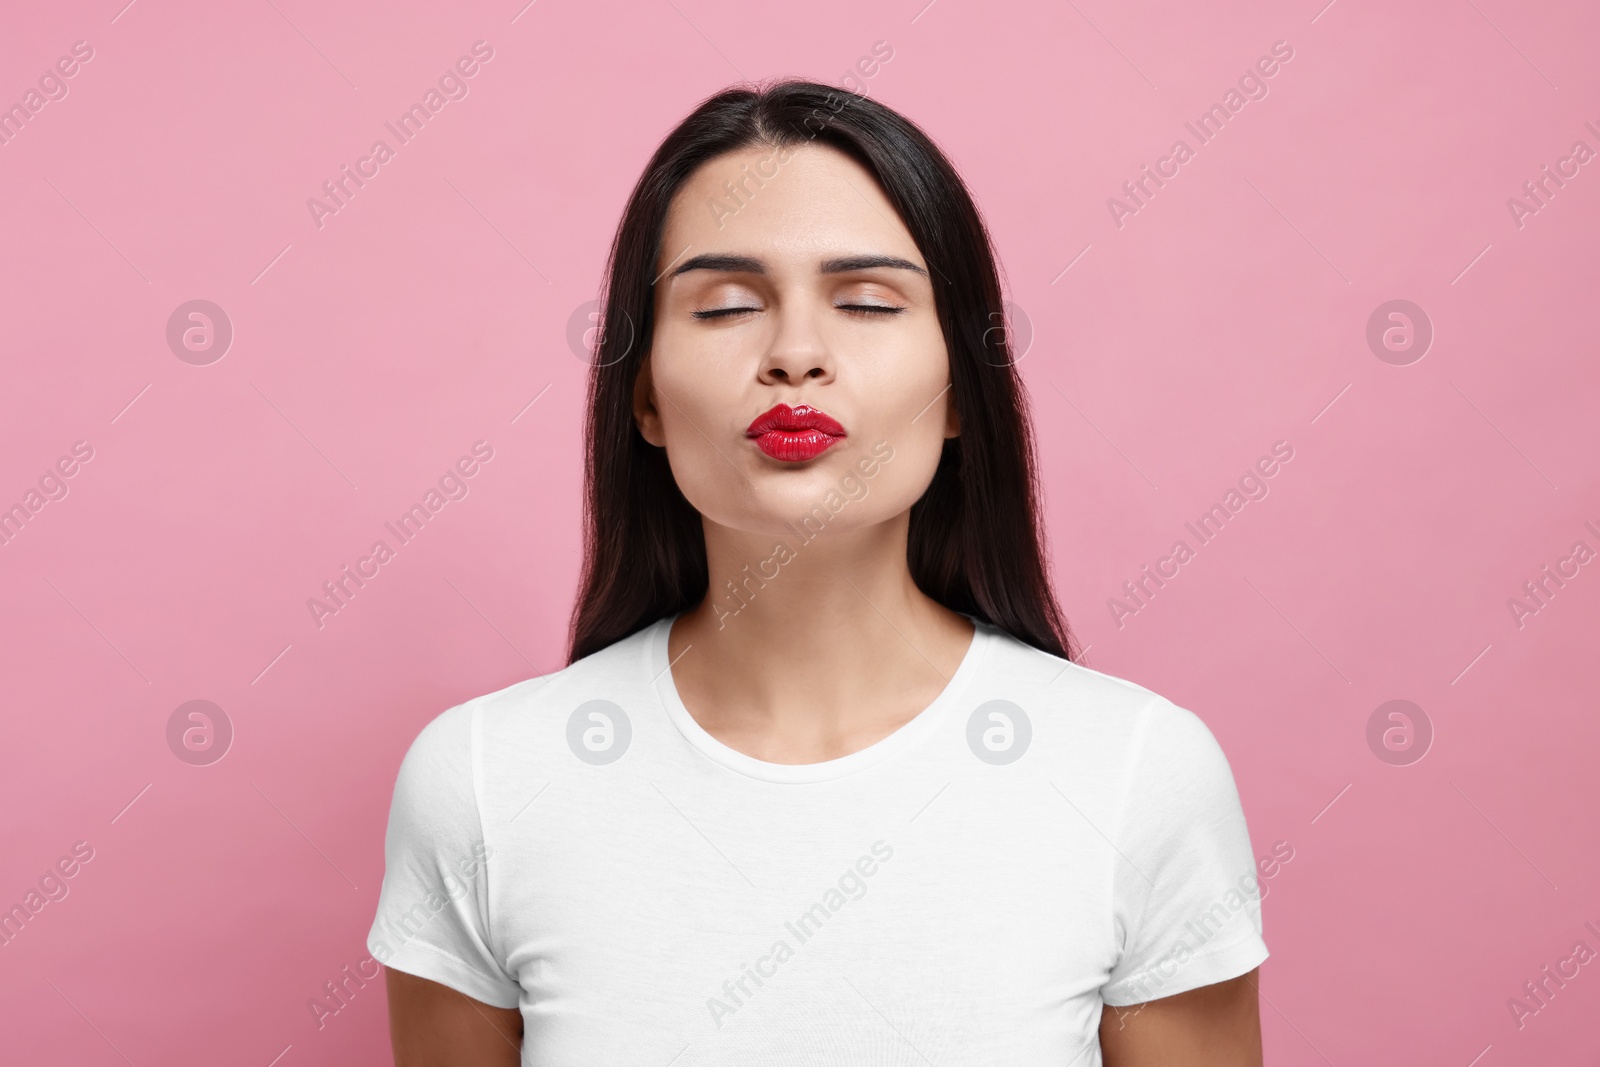 Photo of Beautiful young woman giving kiss on pink background